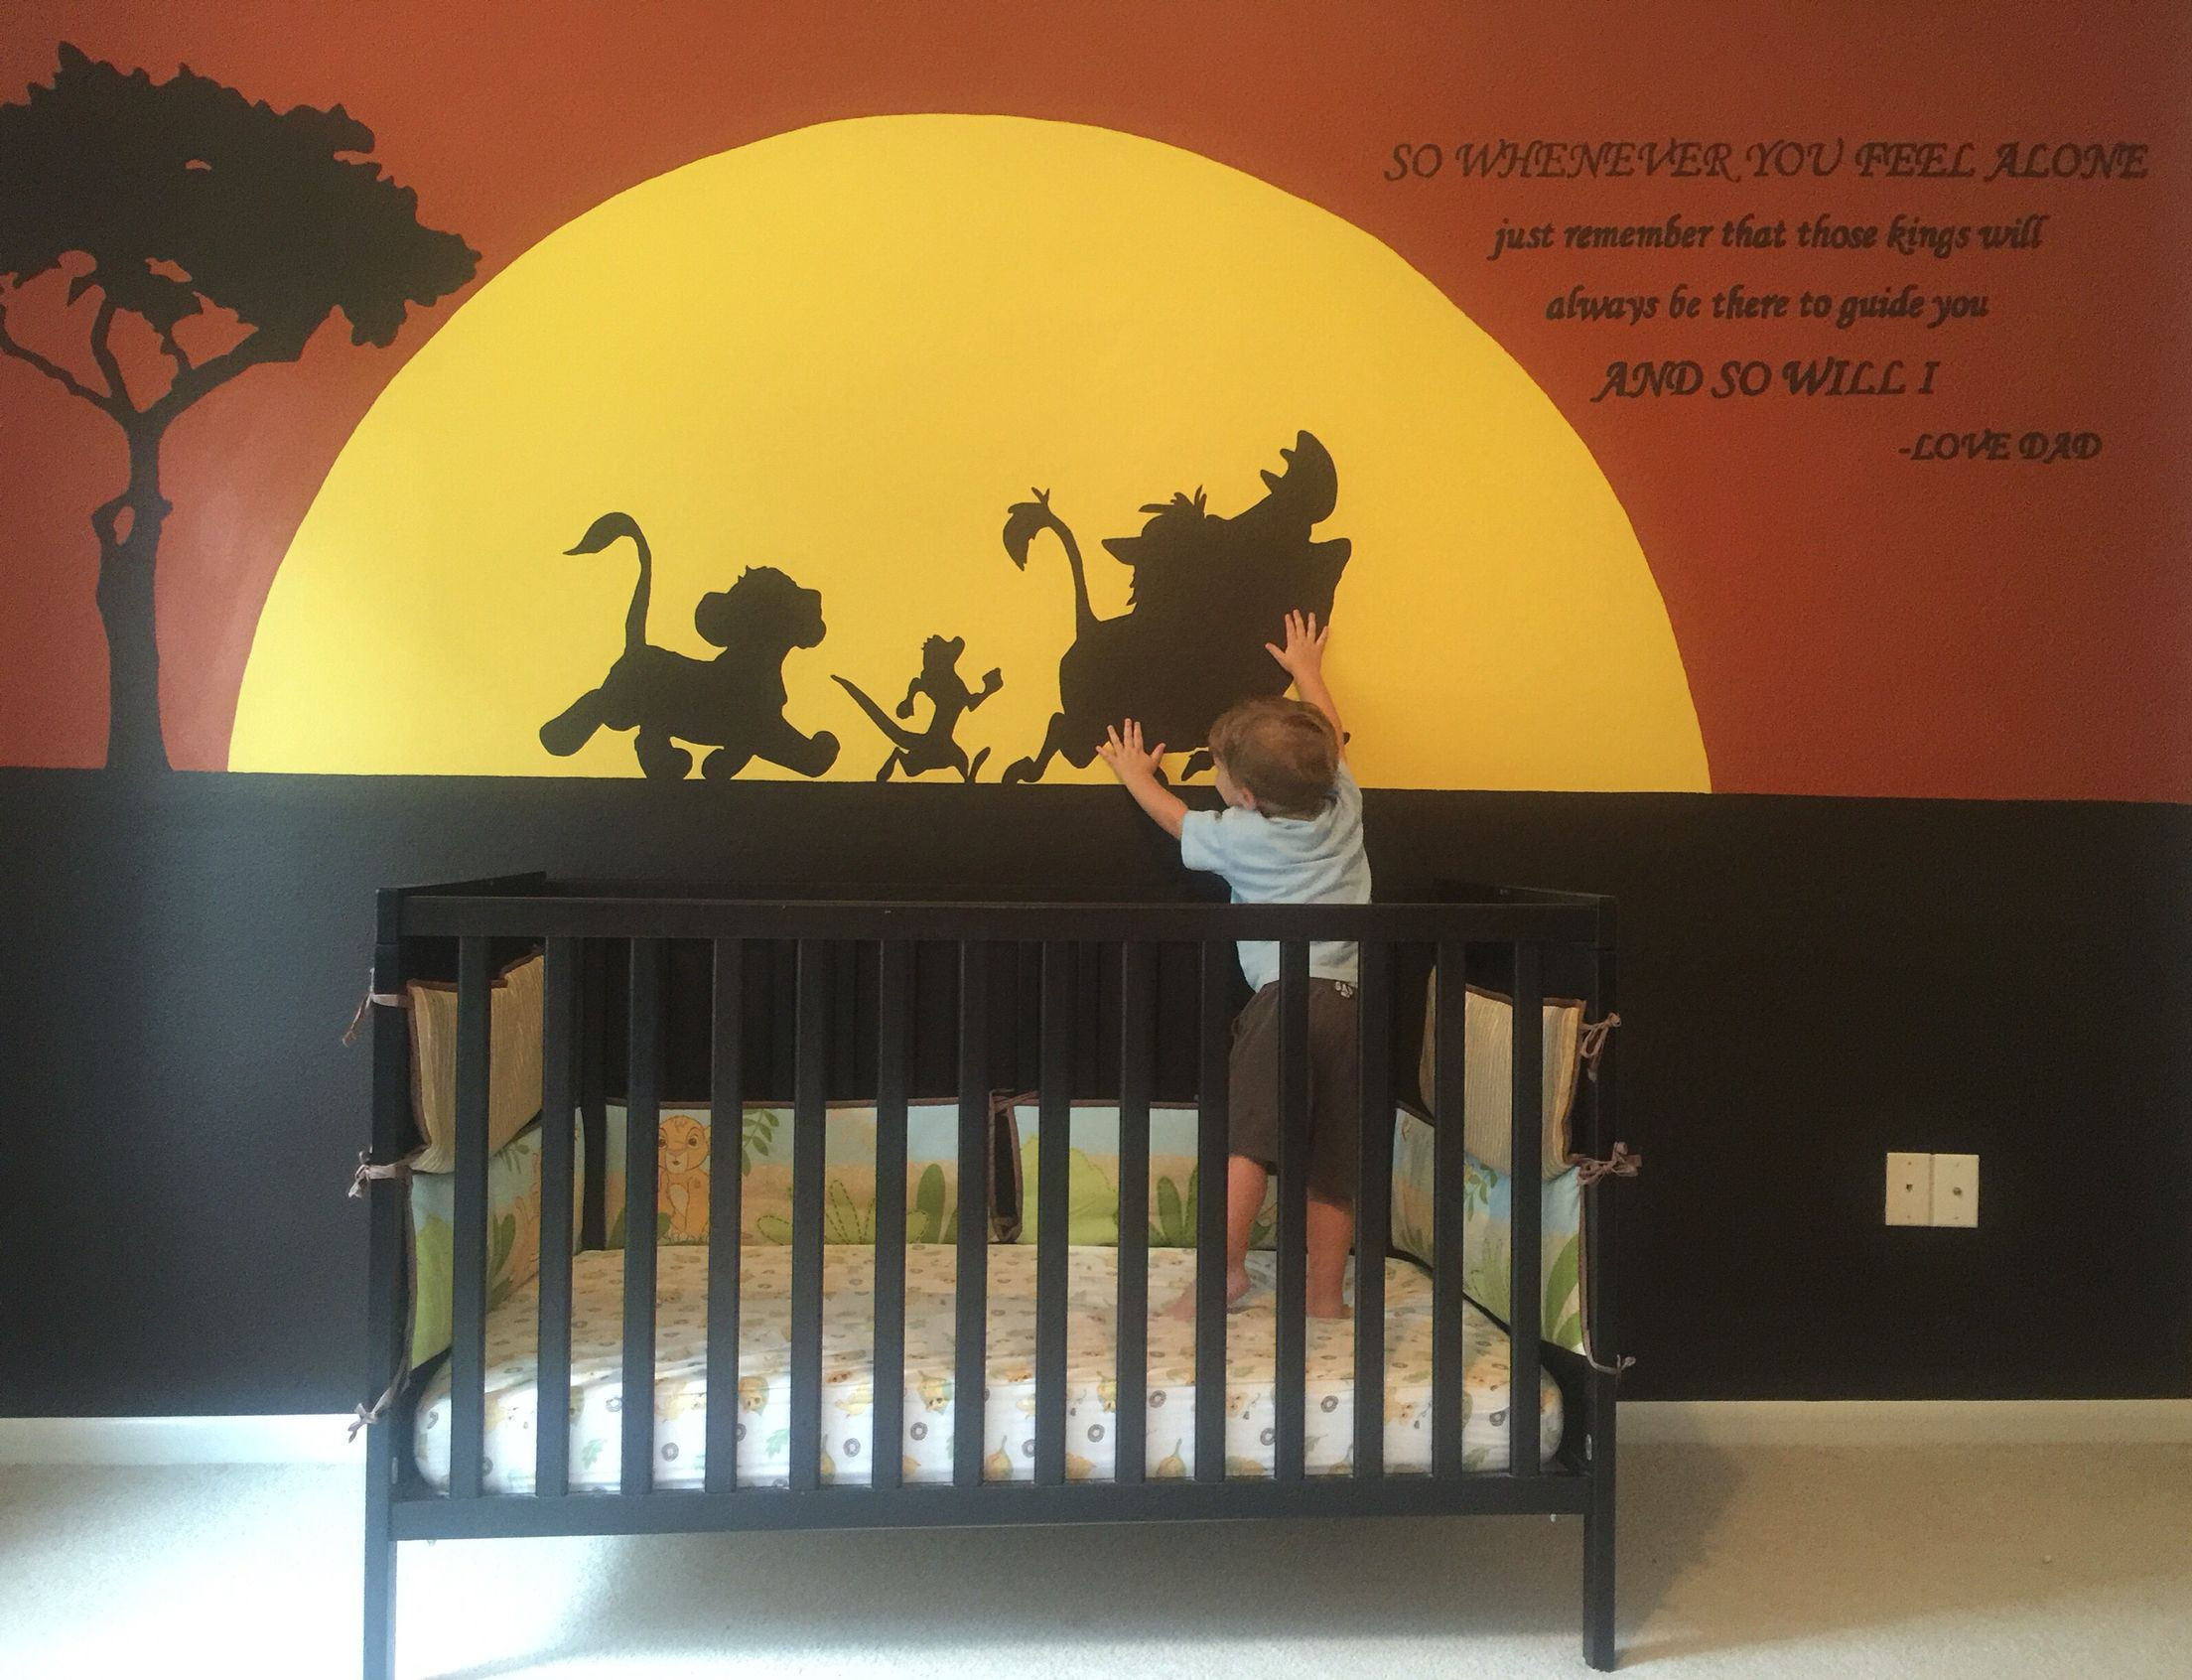 Lion King Baby Room Decor
 The mural I painted on Gunnars wall with the lion king